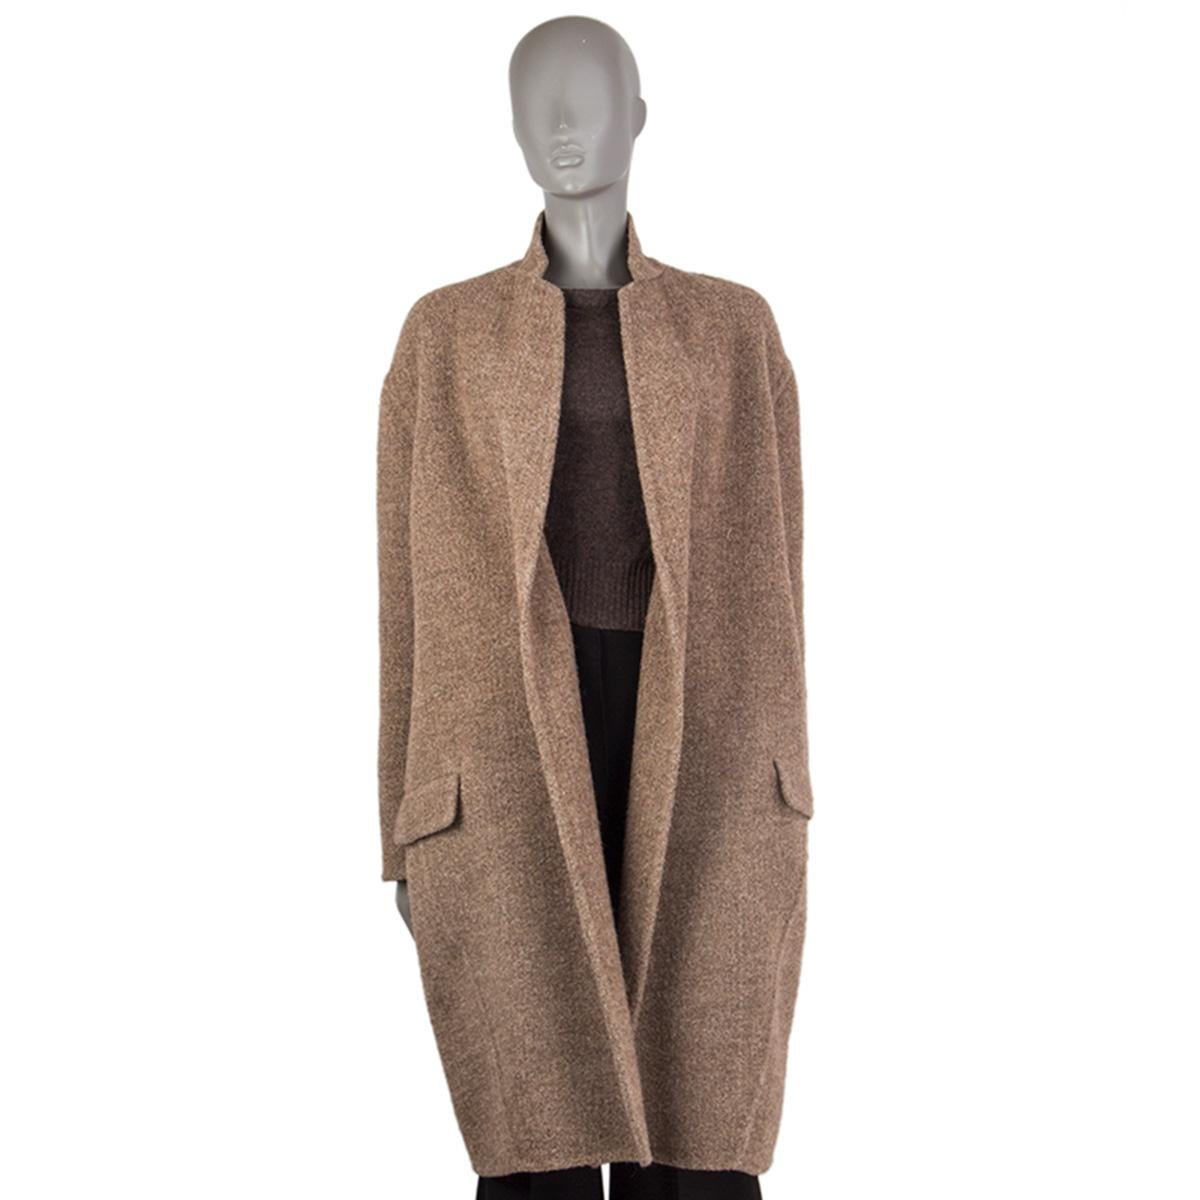 100% authentic Celine open cocoon coat in fawn and beige lama hair (77%), nylon (20%), and wool (3%). With narrow notch collar and two flap pockets on the sides. Sleeves lined in black silk (100%). Has been worn and is in excellent condition.